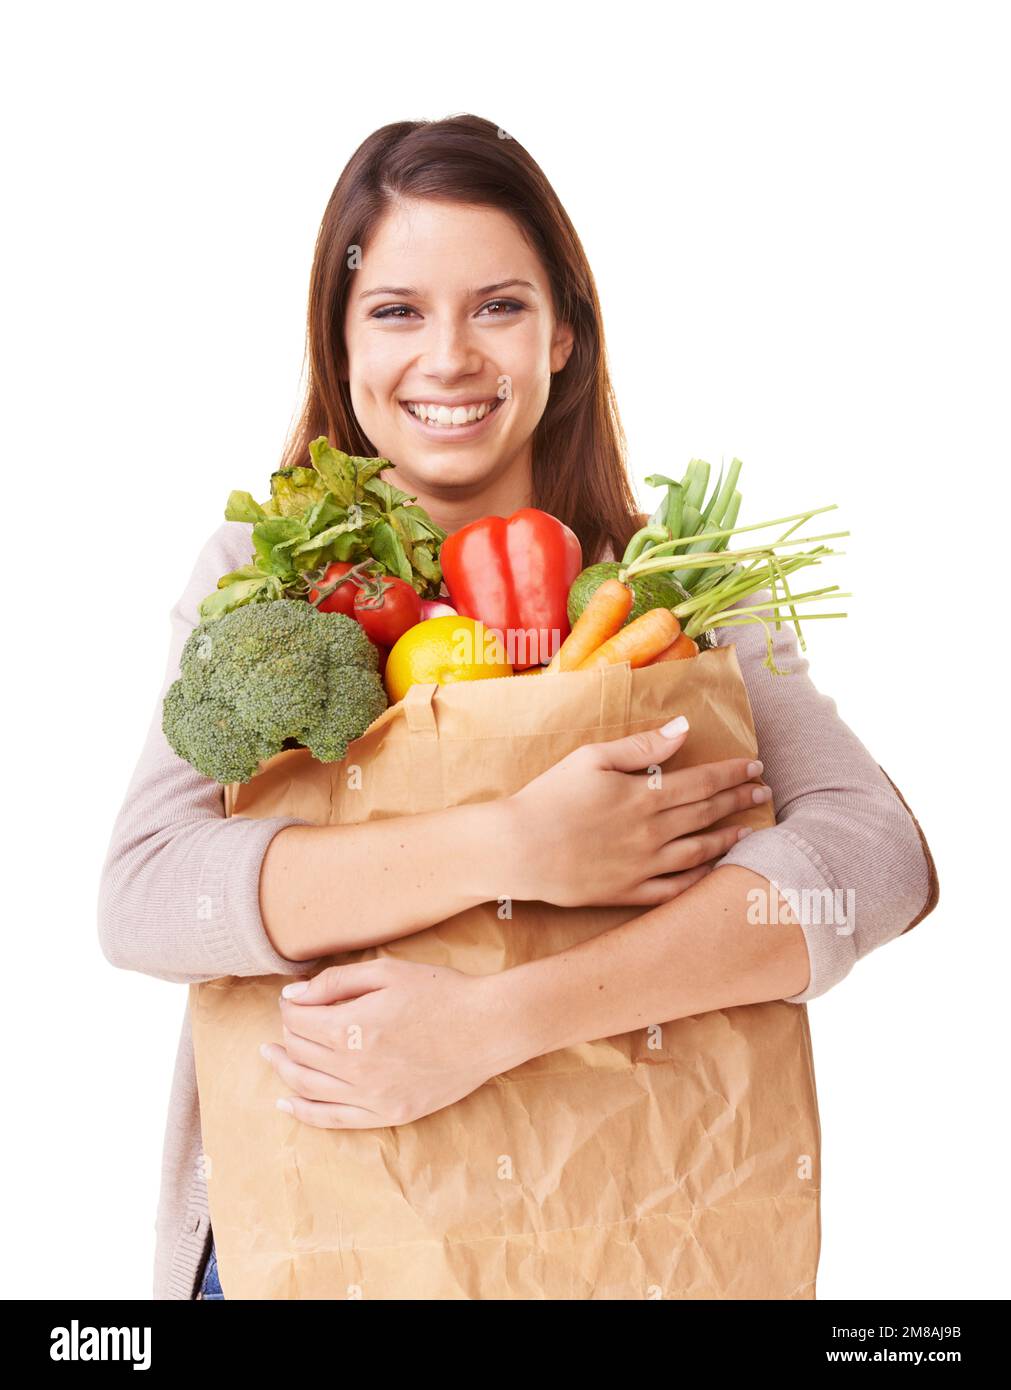 She loves shopping for vegetables. Portrait of an attractive young woman holding a bag of groceries. Stock Photo